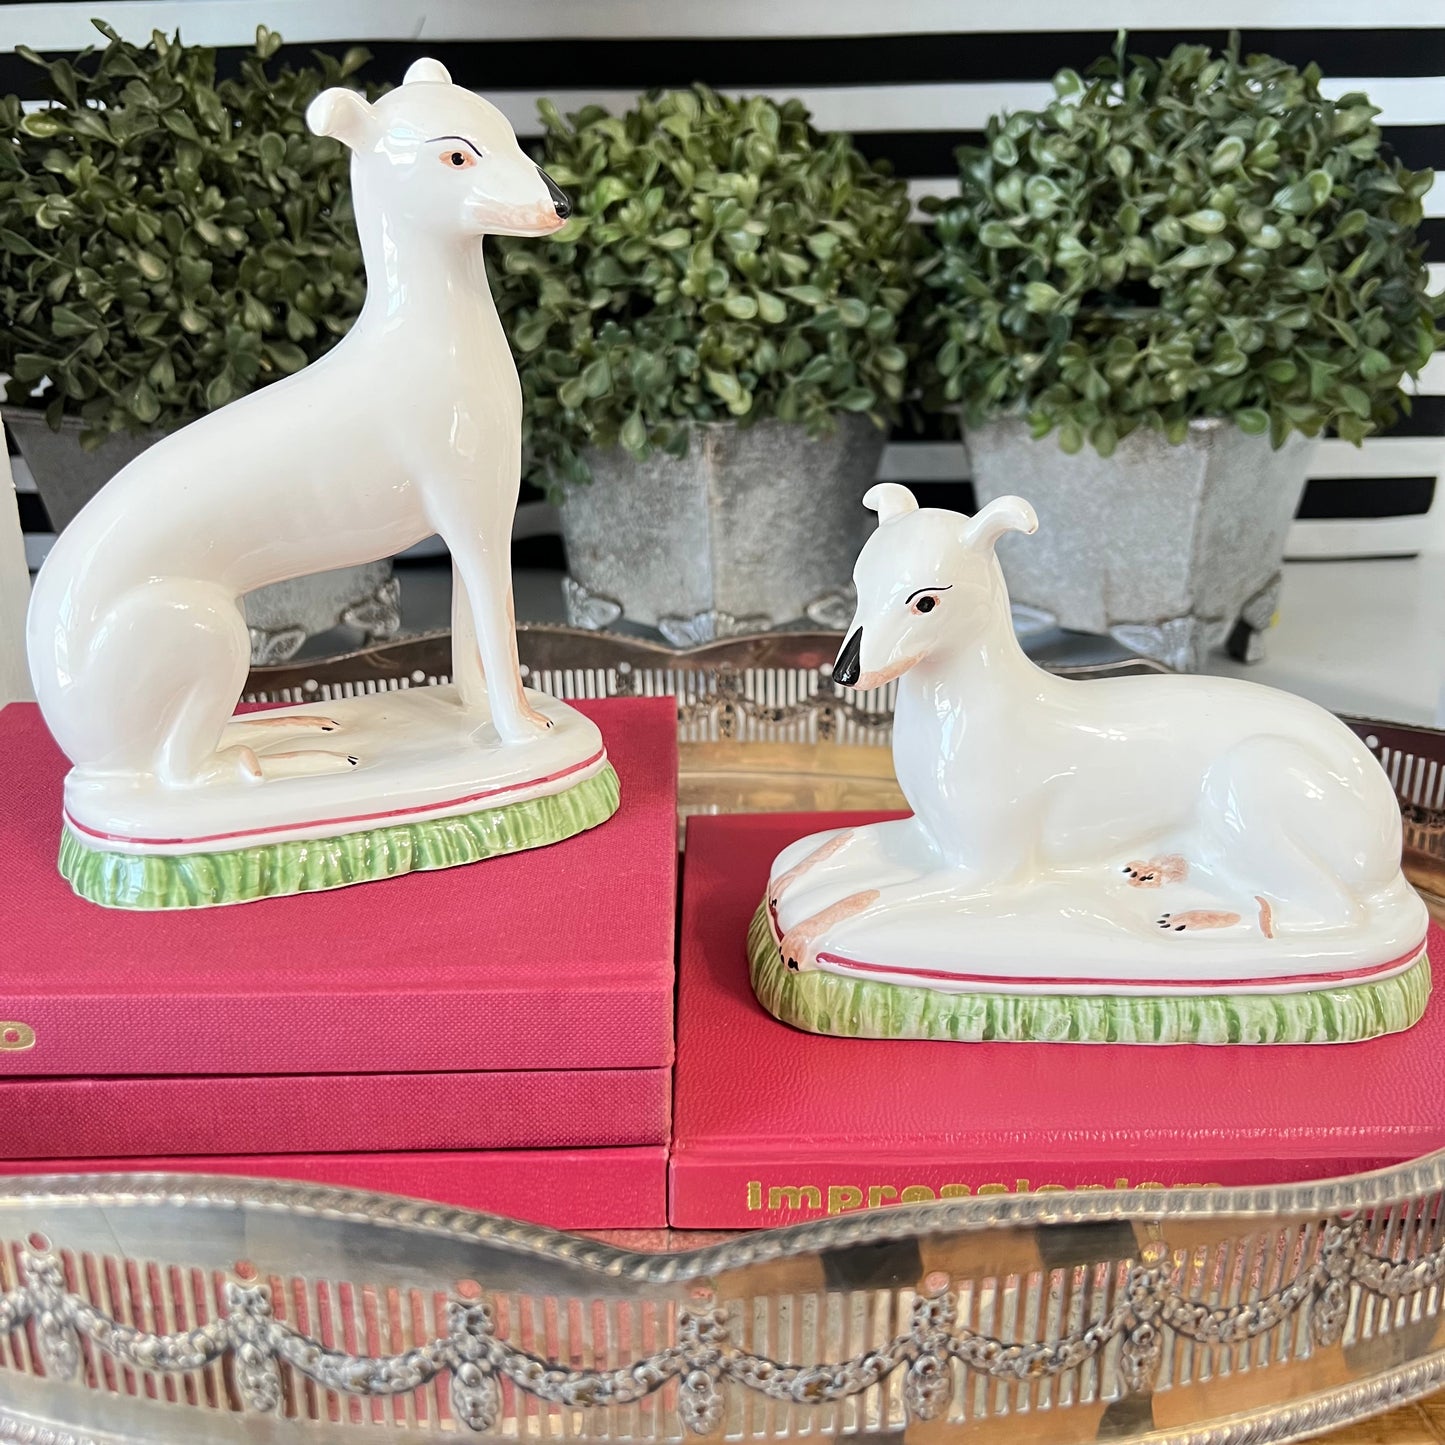 Italian Hand Painted Greyhound Whippets White Porcelain Dogs Bookends (Pair) - Pristine!